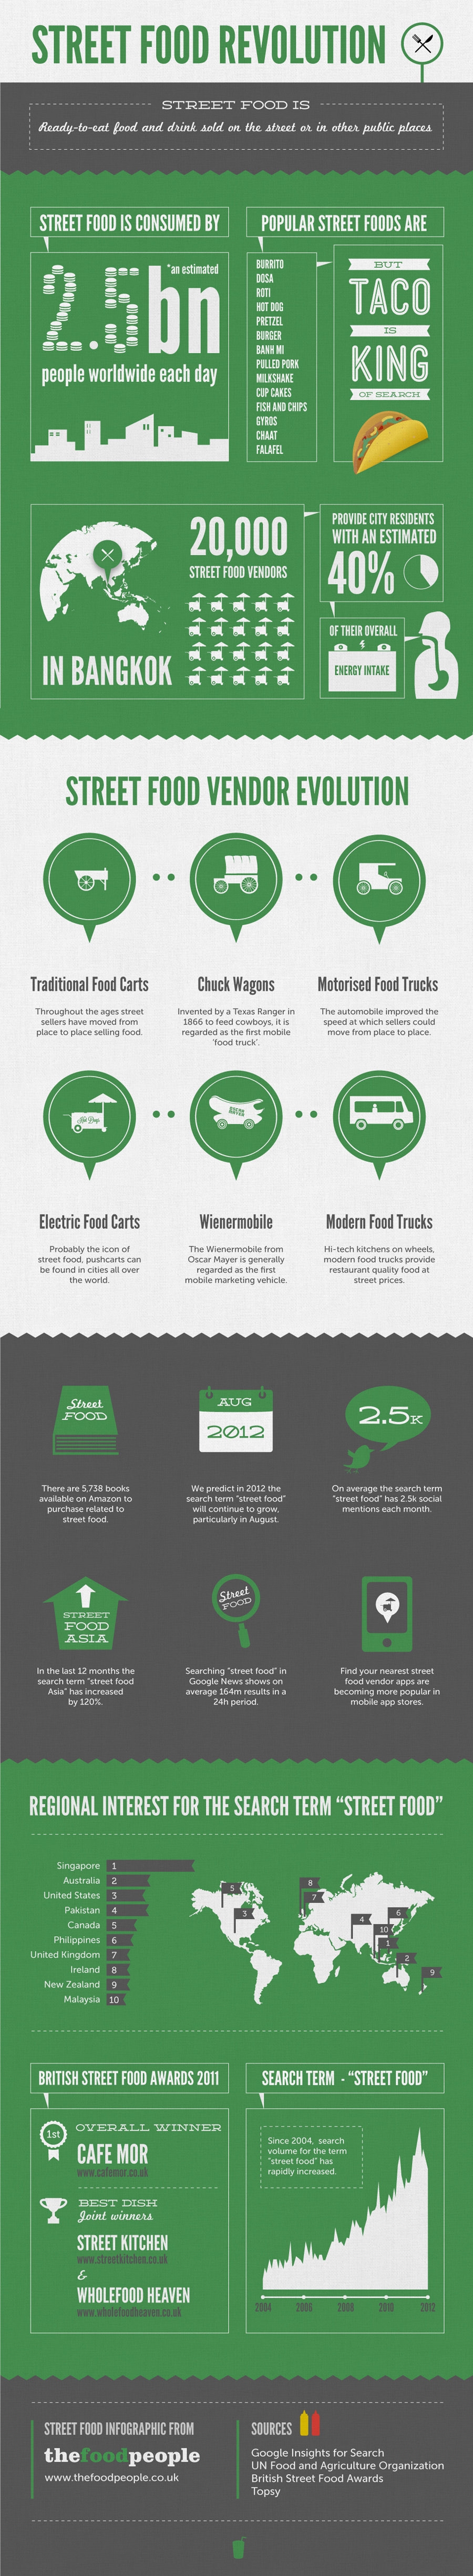 Infographic of Street Food Trends